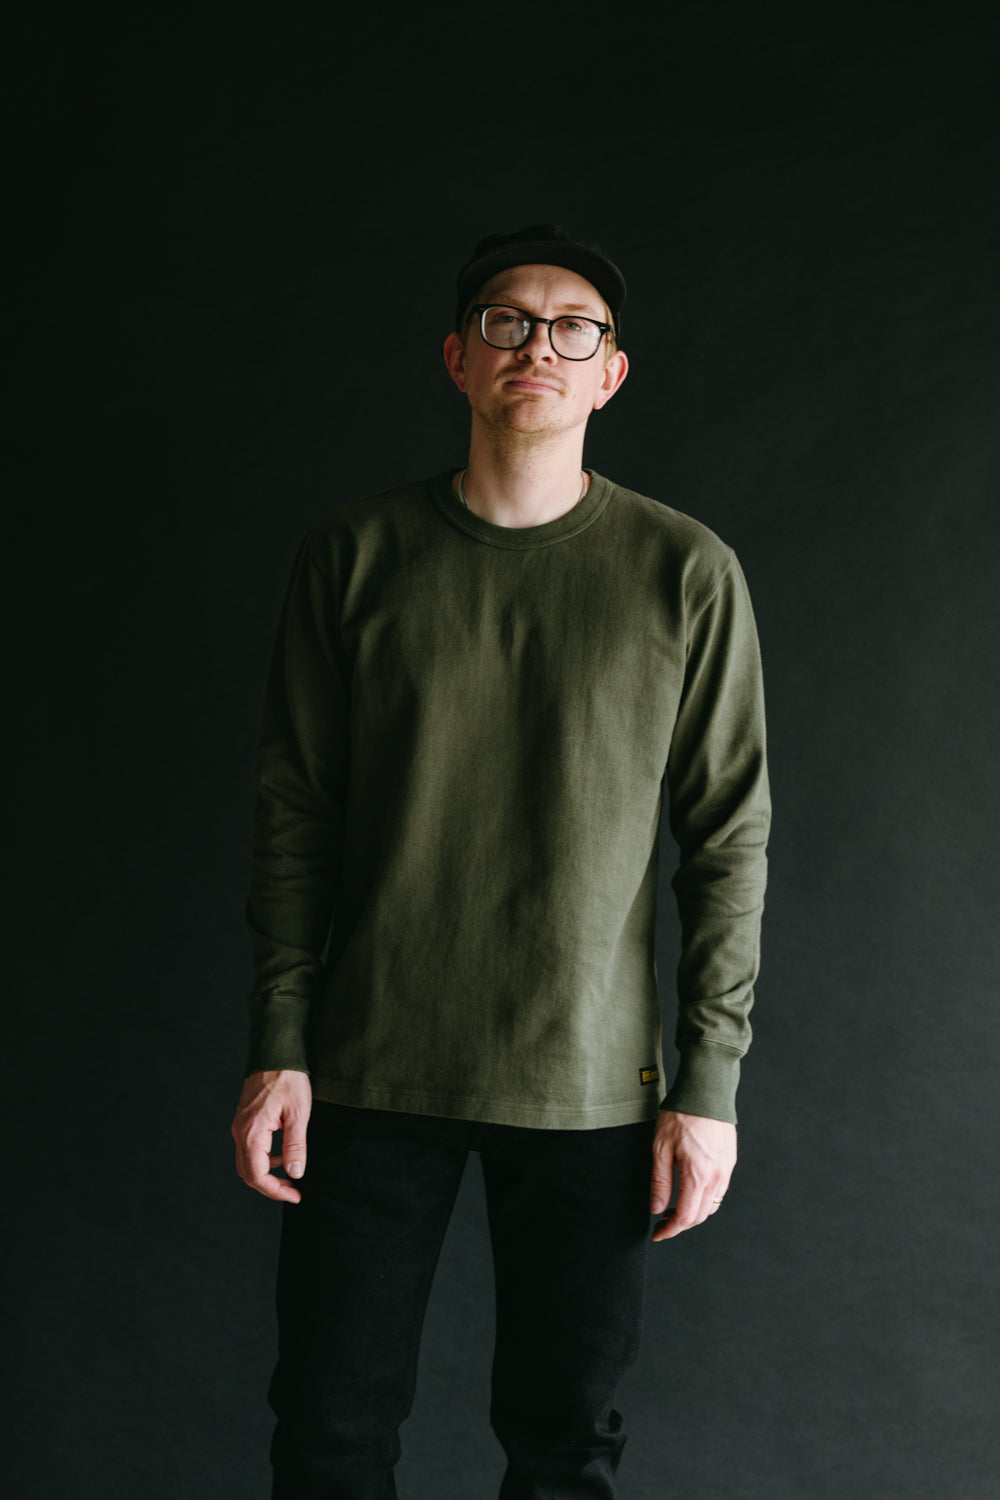 IHTL-1501-OLV - 11oz Cotton Knit Long Sleeved Crew Neck Sweater - Olive